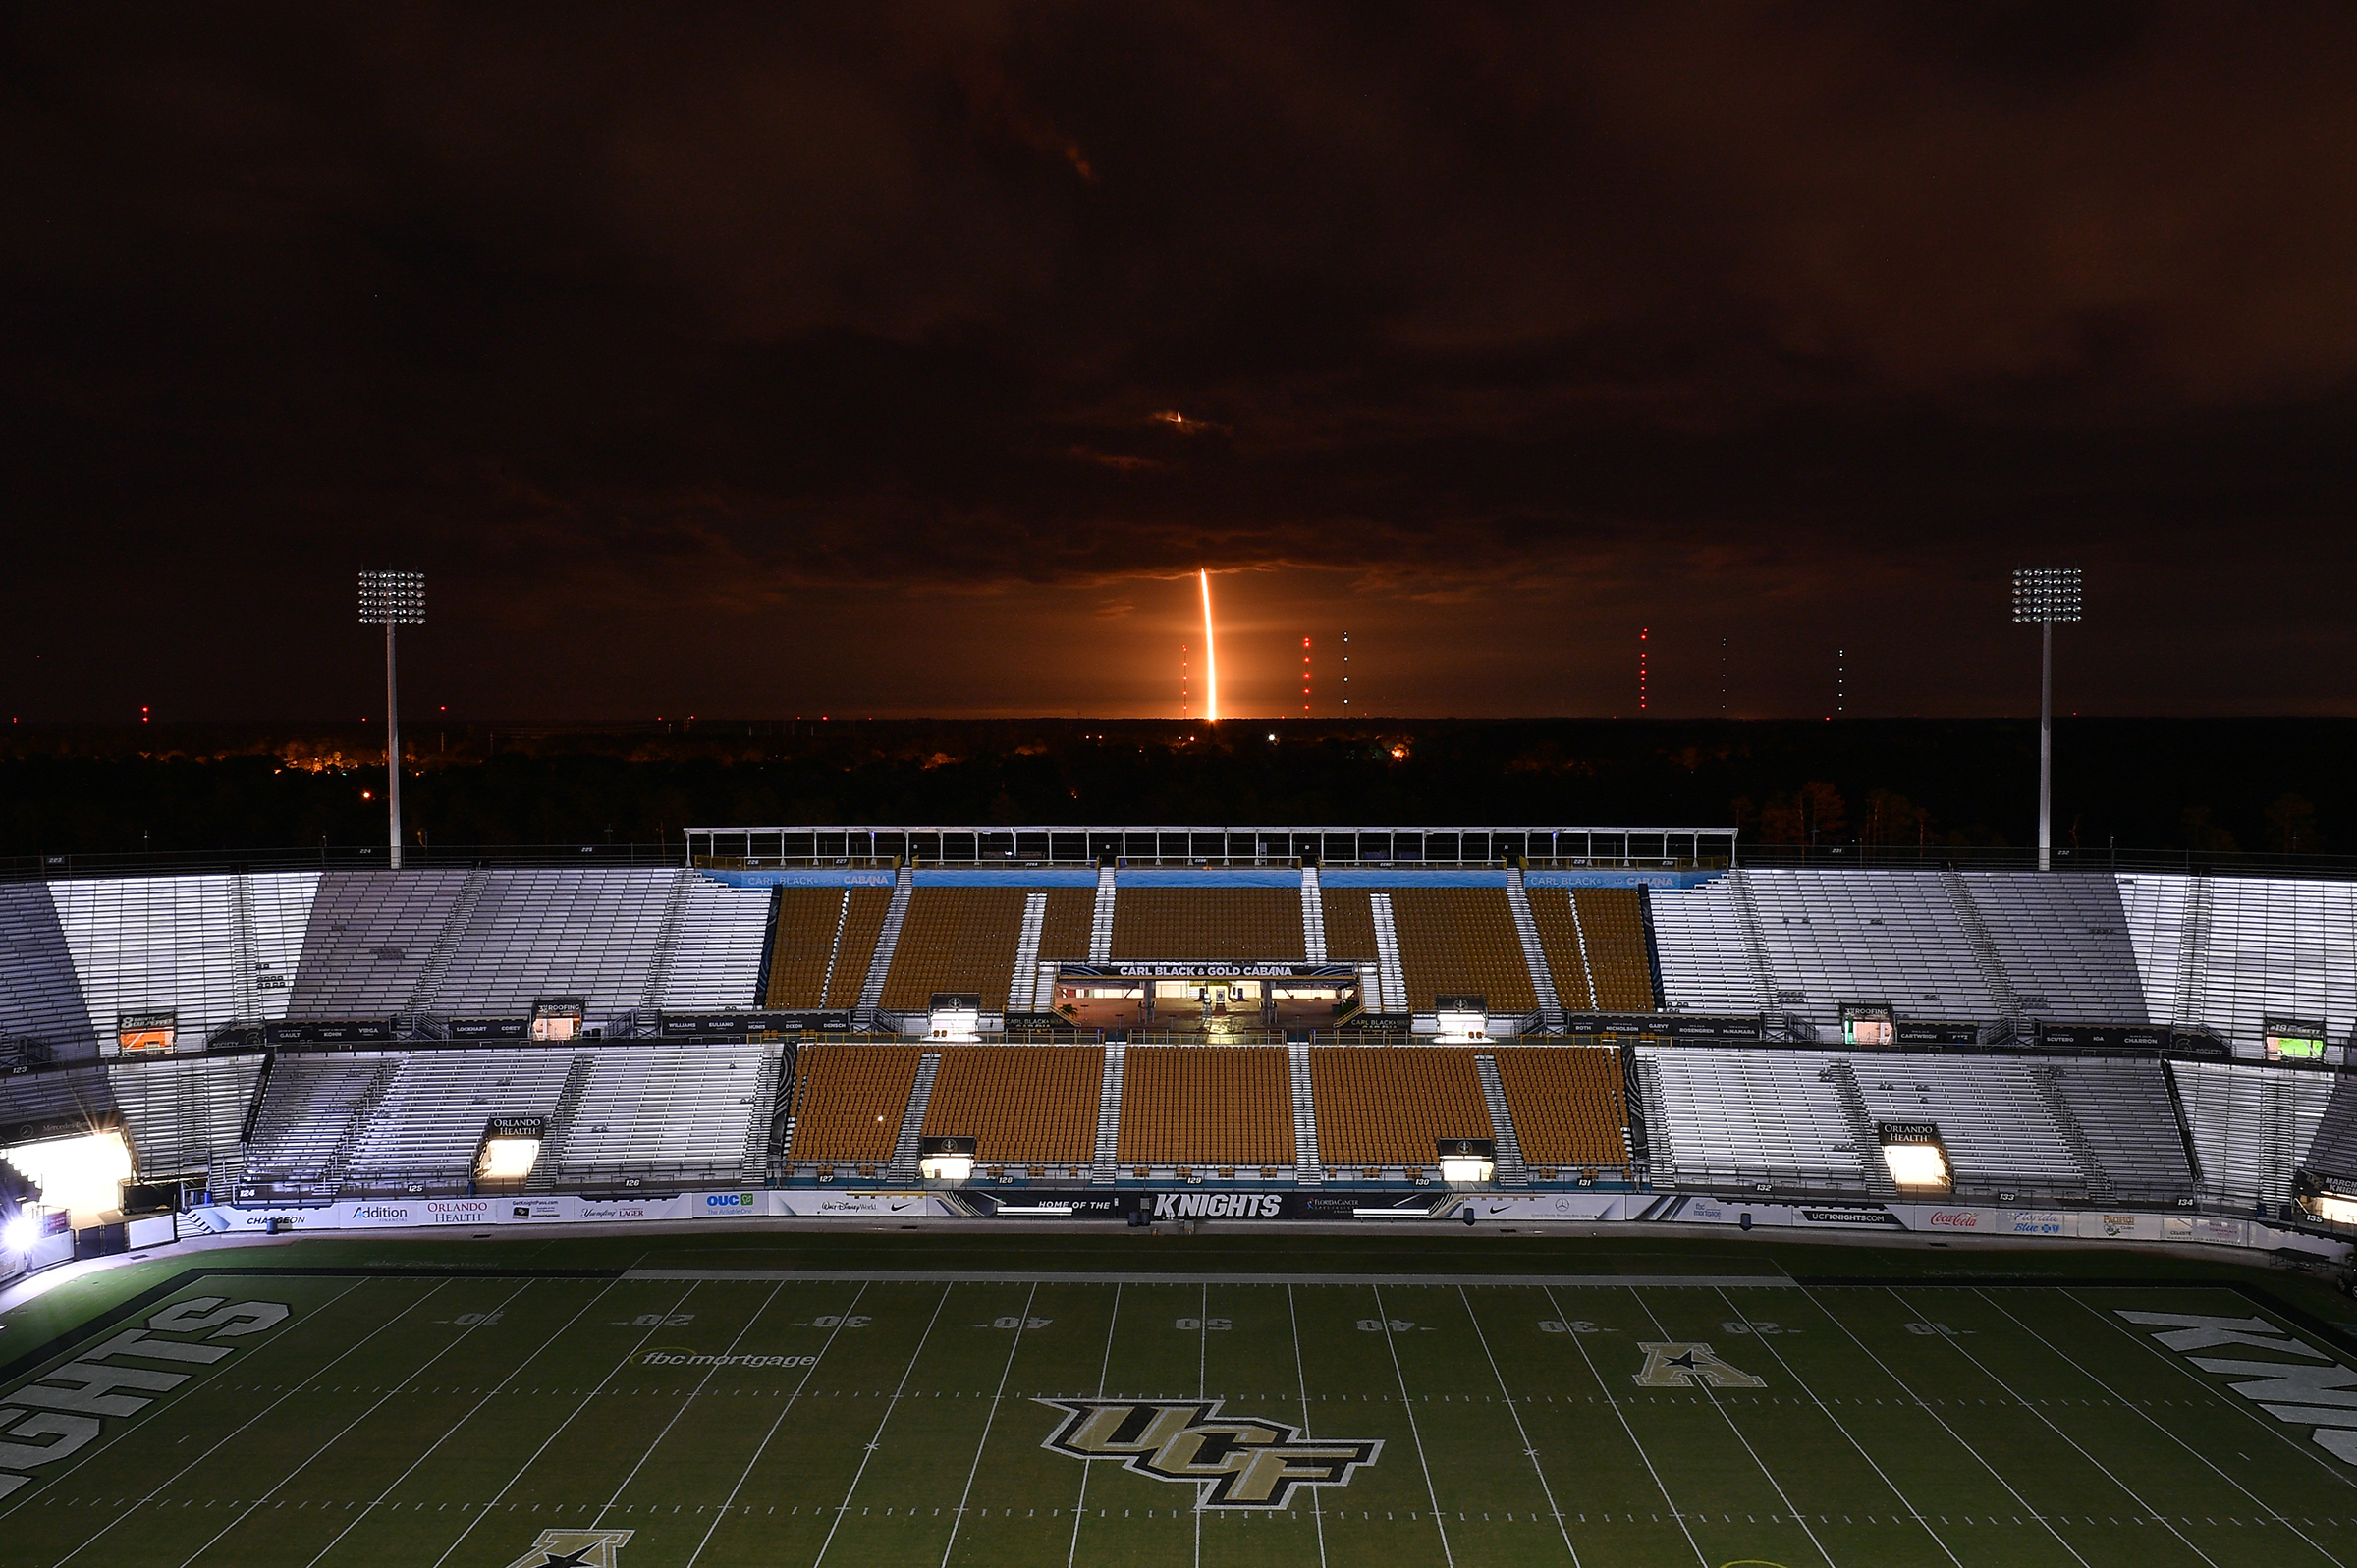 A view of the SpaceX Falcon 9 rocket launch, as seen from the UCF Knights' stadium in Orlando on Nov. 15. (Conor Kvatek—Collegiate Images/Getty Images)